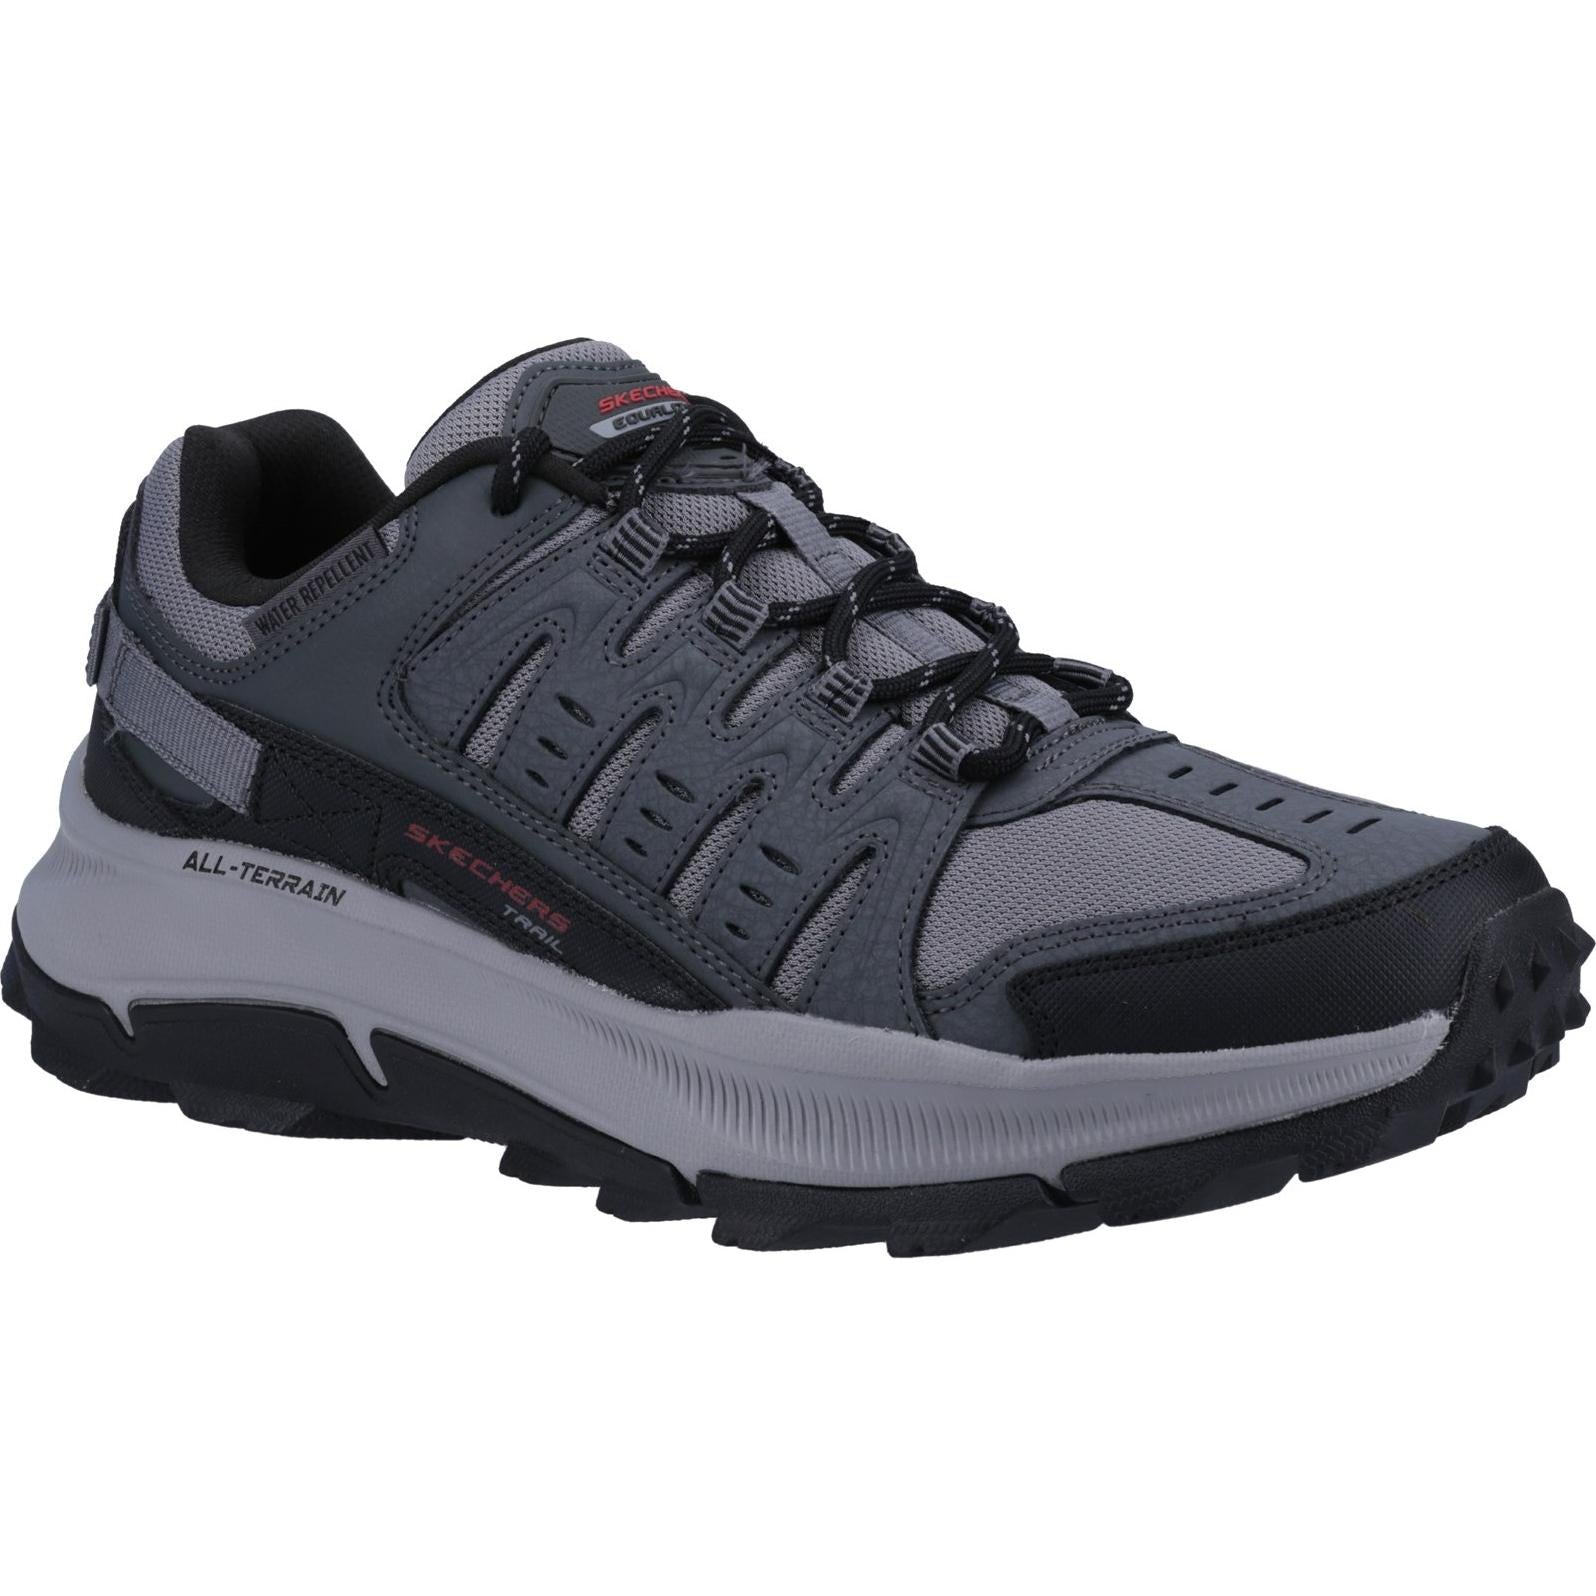 Skechers Equalizer 5.0 Trail Solix Trainers